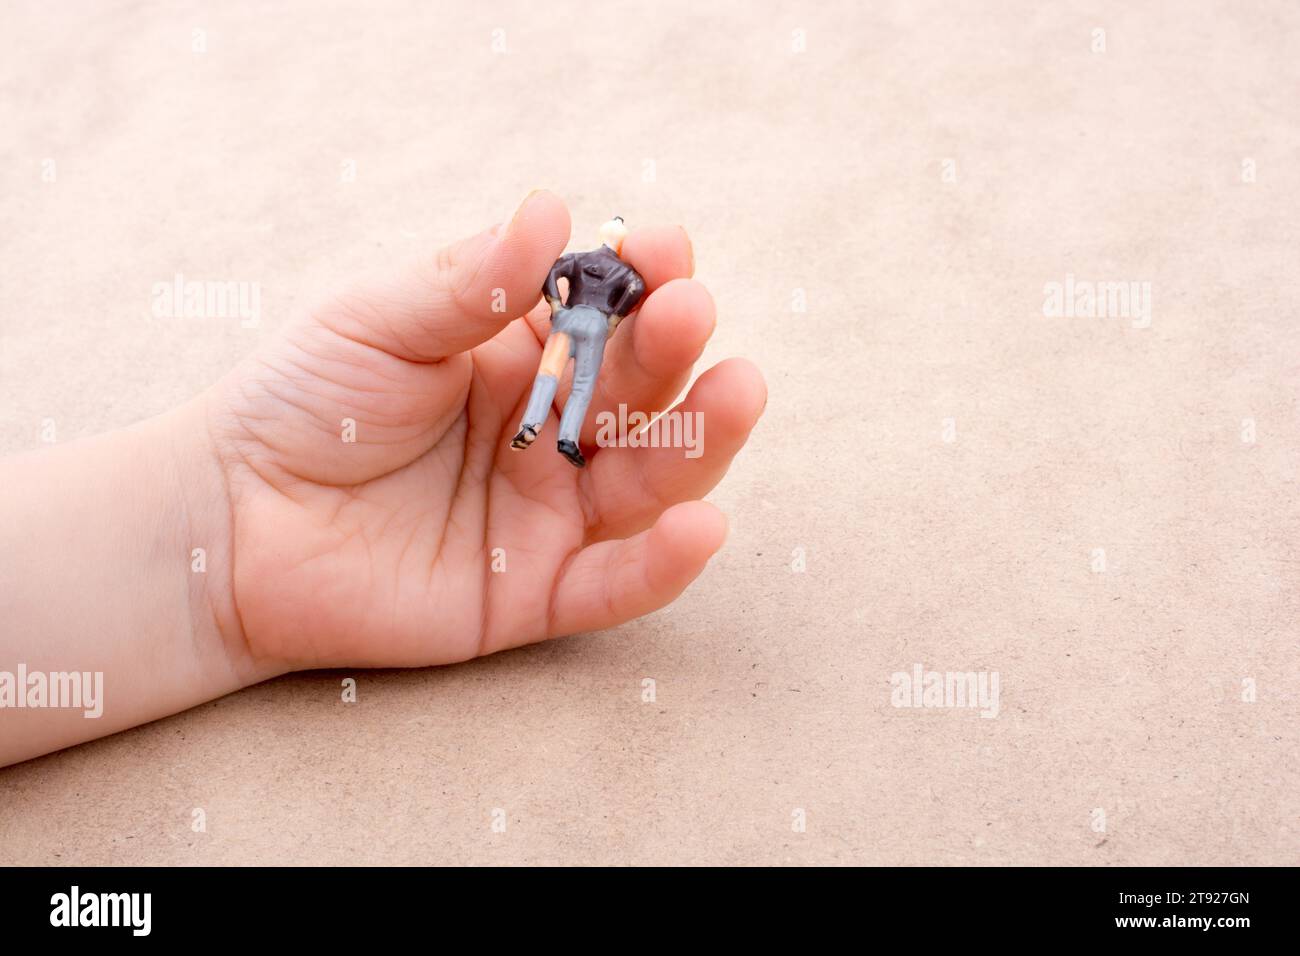 Little man figure in hand on a white background Stock Photo